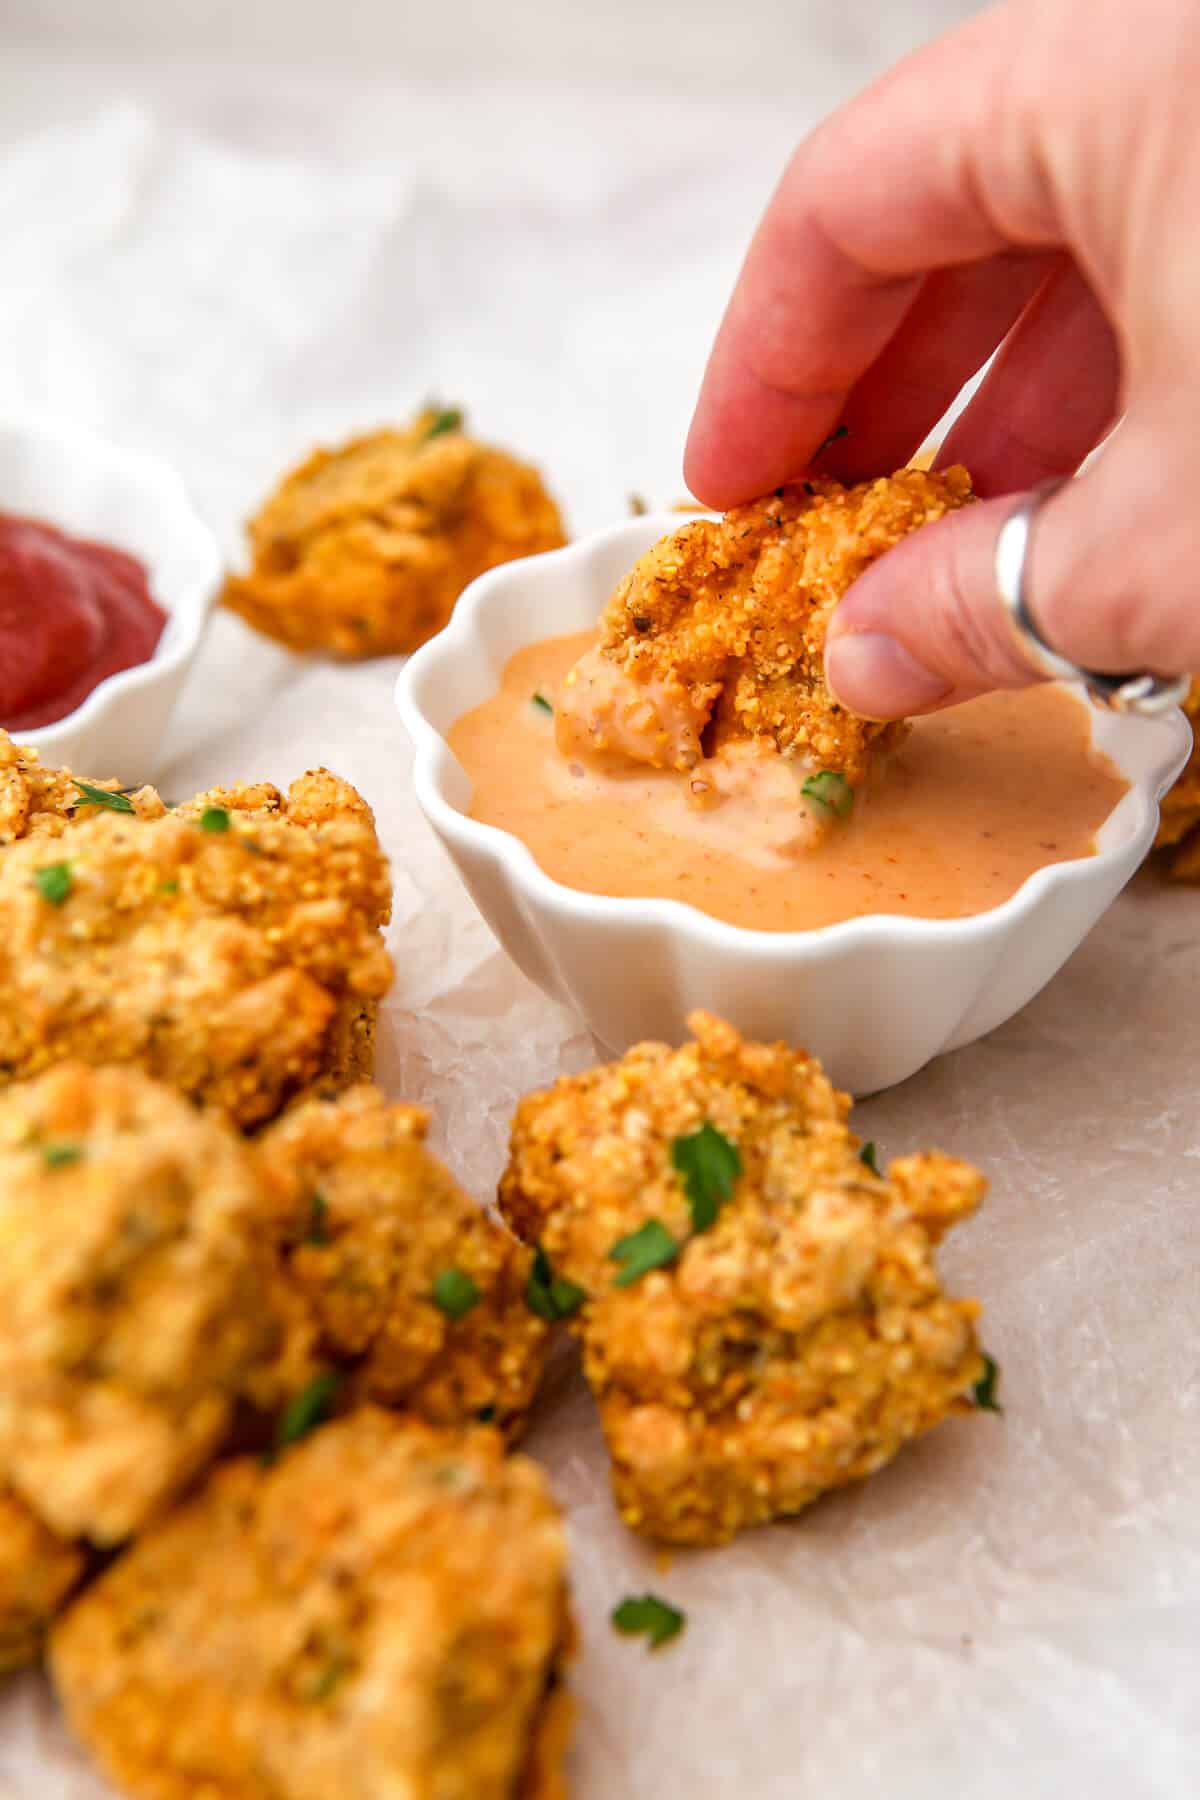 A vegan nugget being dunked in a small bowl of vegan chick fil a sauce.